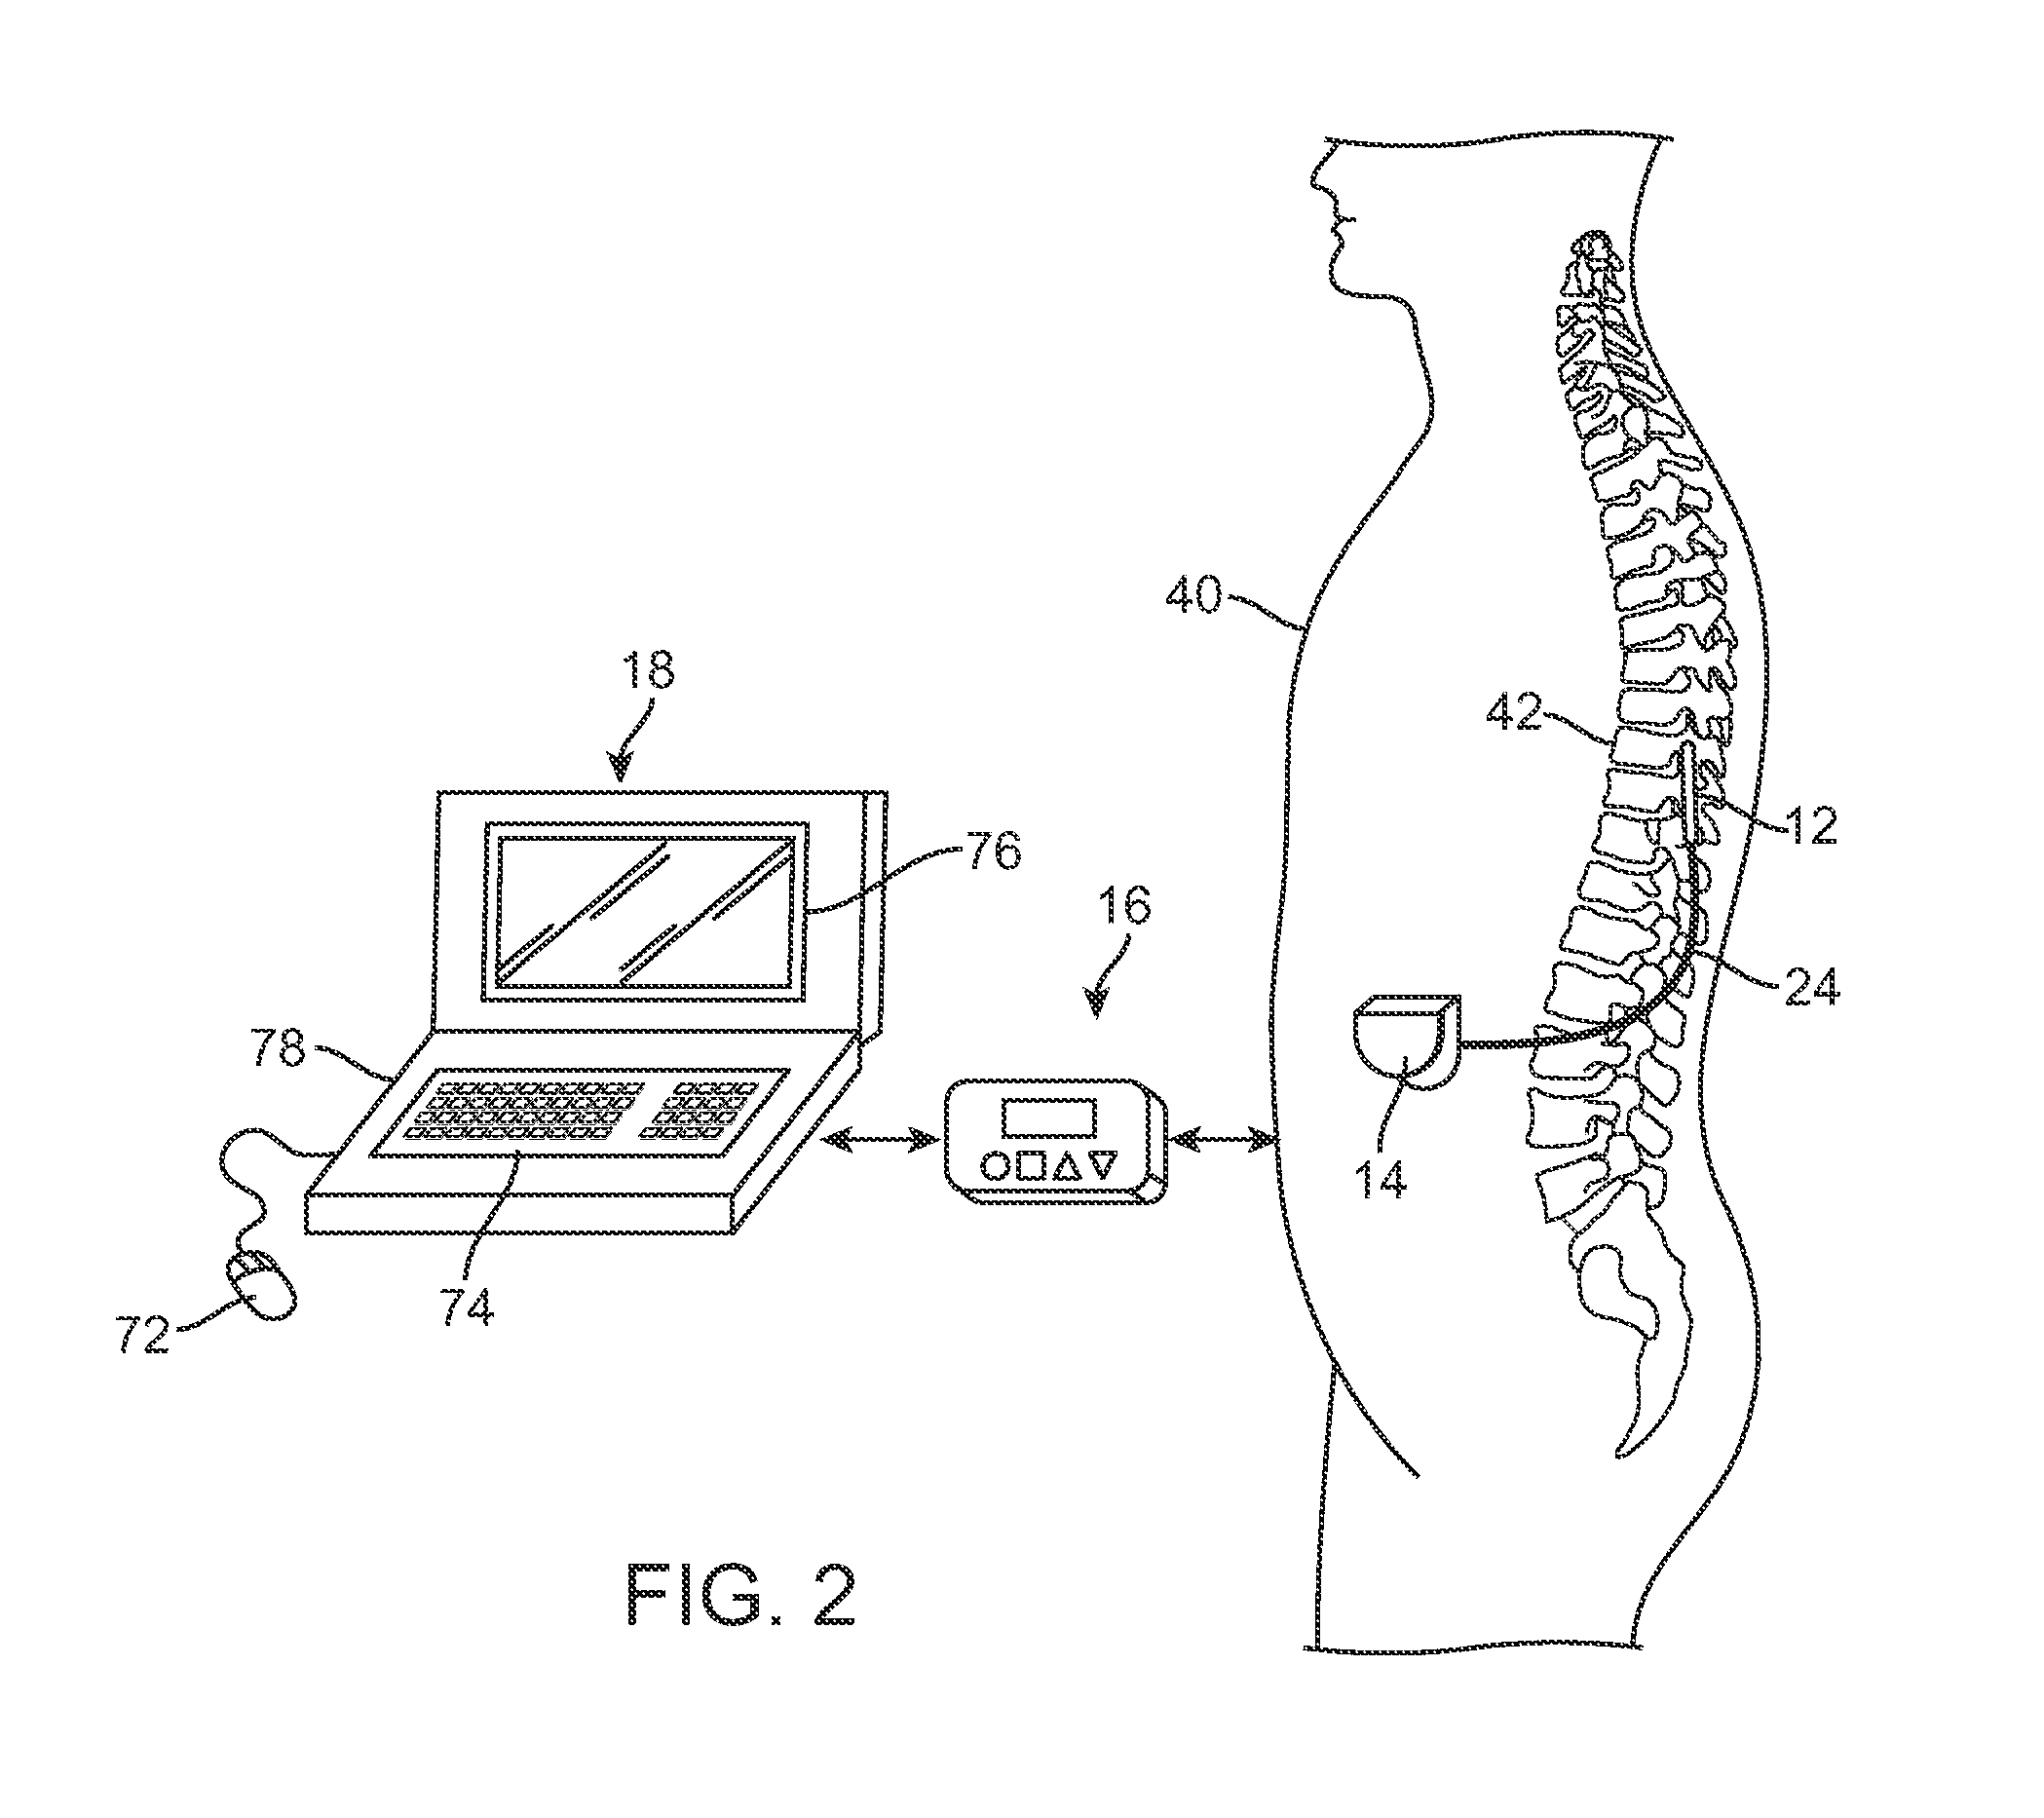 System and method for determining appropriate steering tables for distributing stimulation energy among multiple neurostimulation electrodes